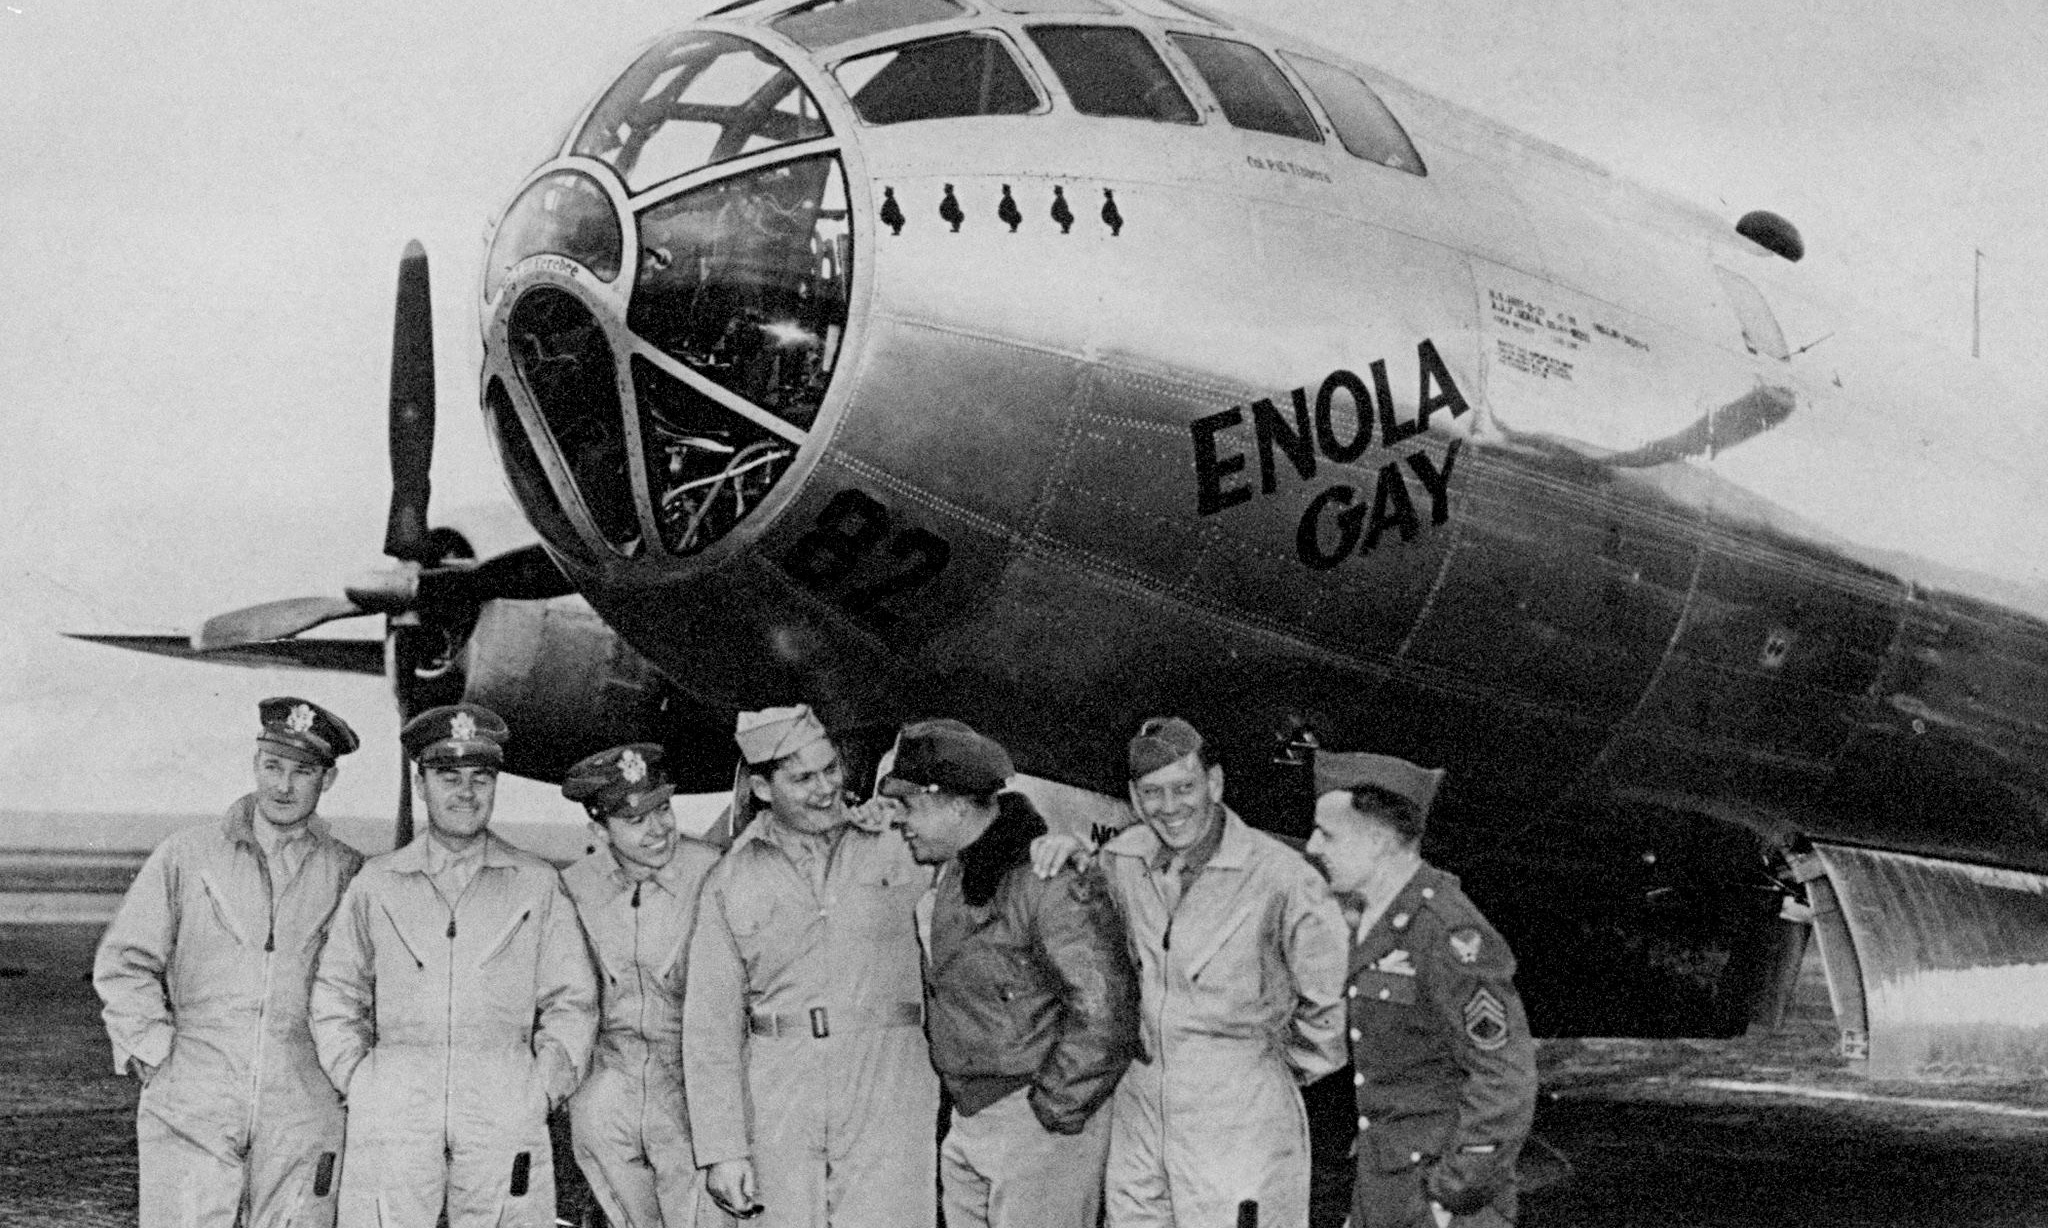 Did the crew of the enola gay feel guilty